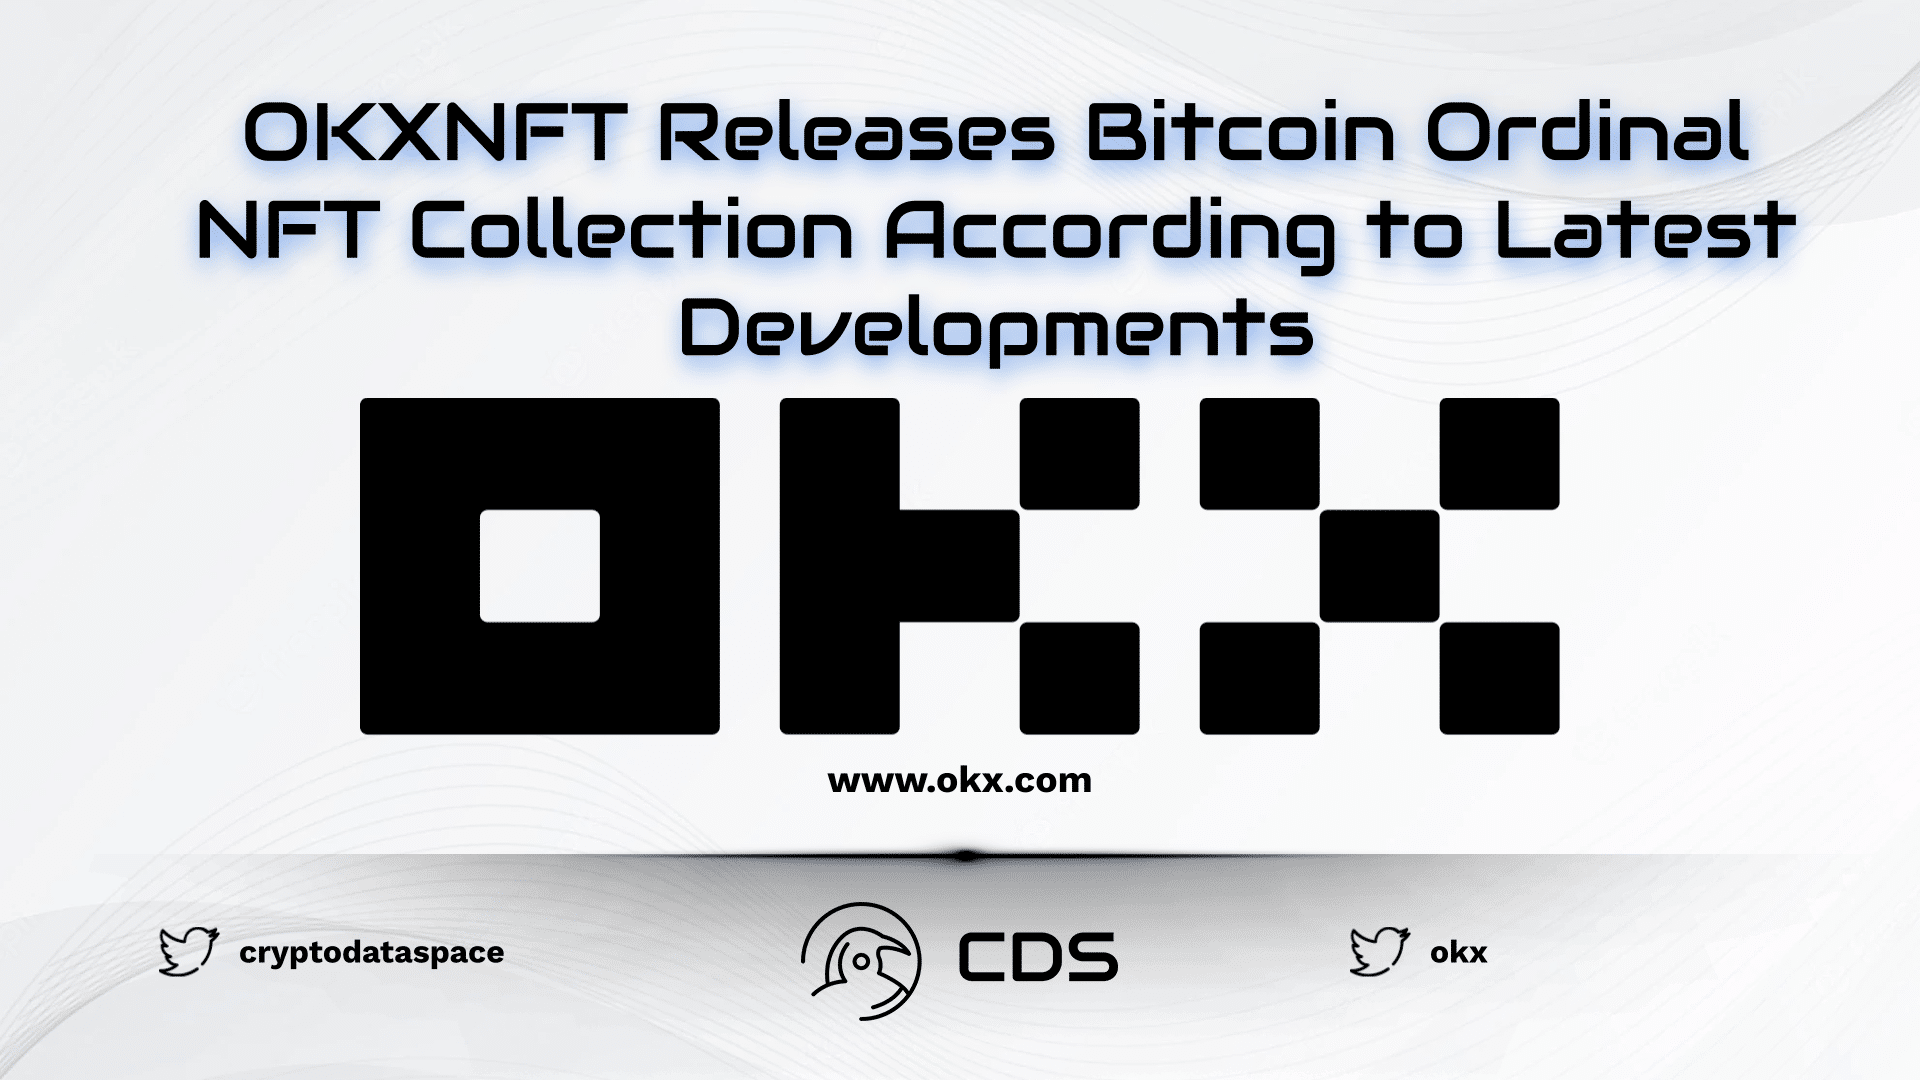 OKXNFT Releases Bitcoin Ordinal NFT Collection According to Latest Developments